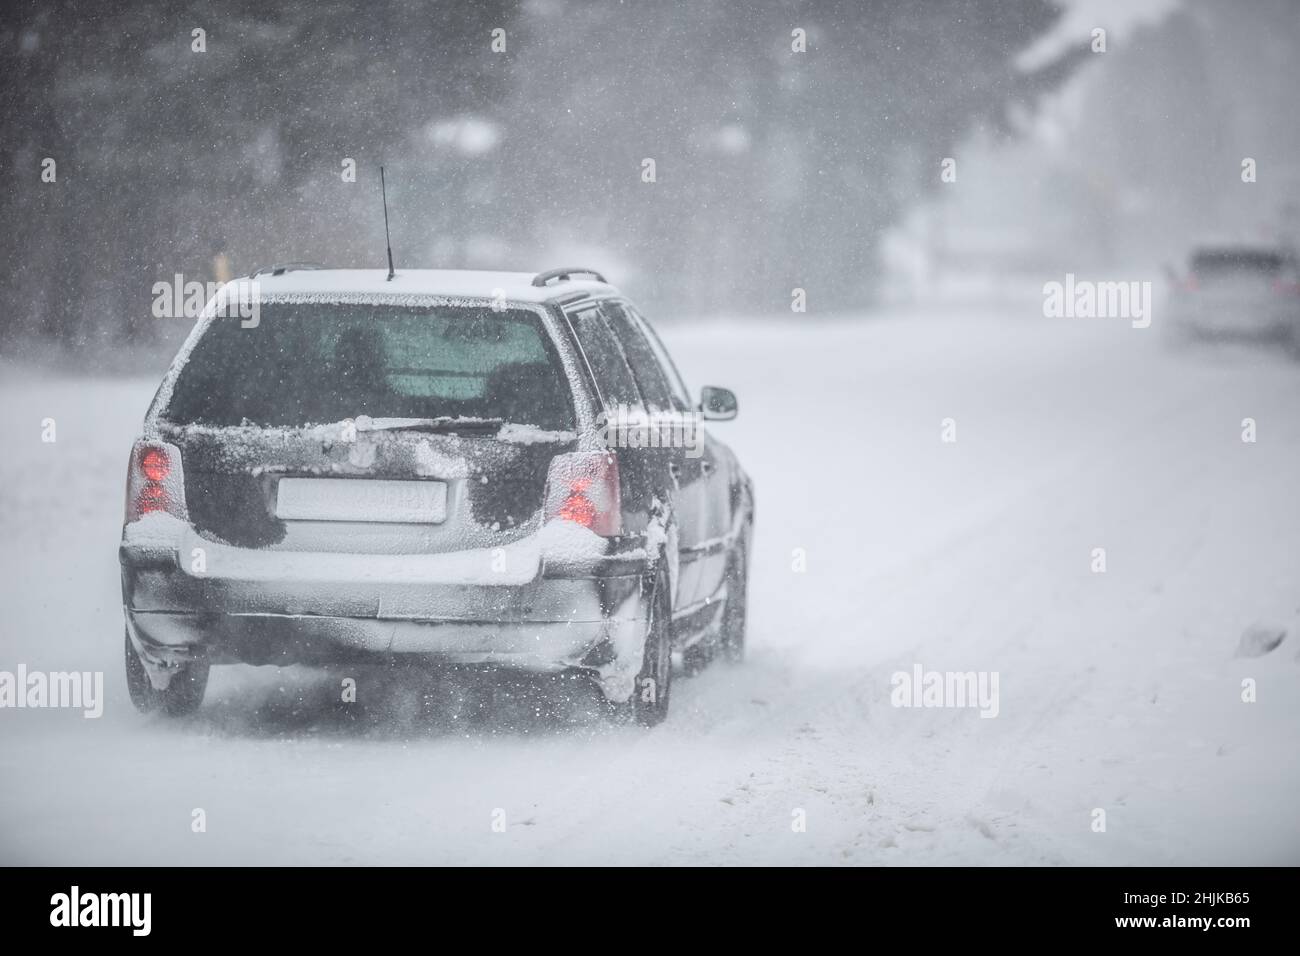 Liptov, Slovakia - JANUARY 30, 2022. Car covered in snow driving in snowstorm on a cold winter day. Stock Photo